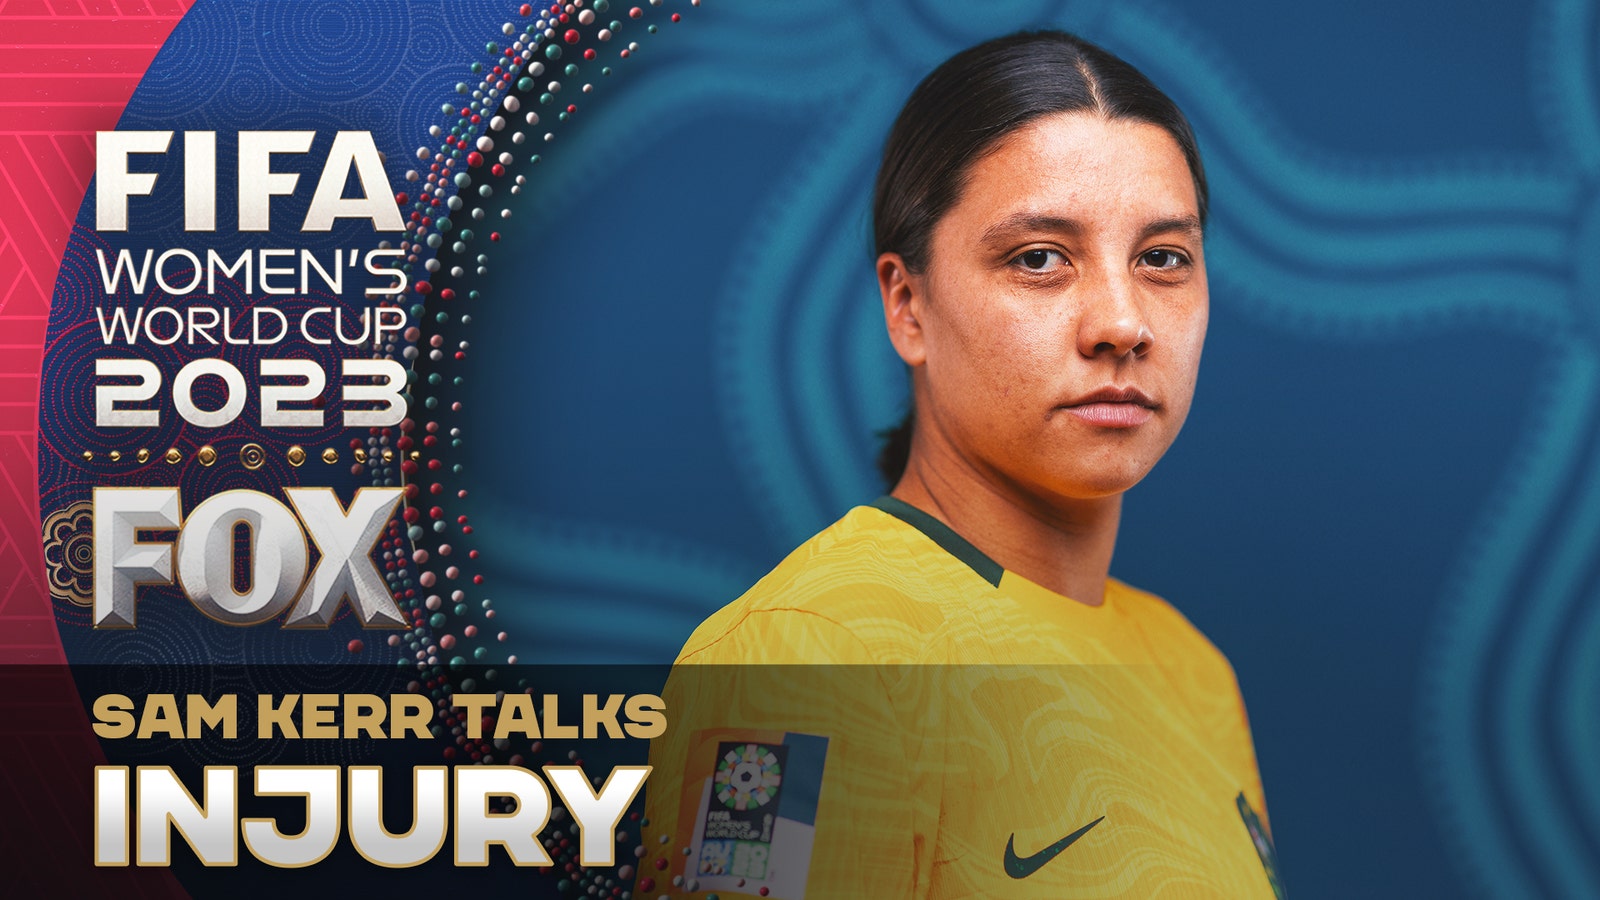 "It was quite frustrating" — Australia's Sam Kerr talks about her injury